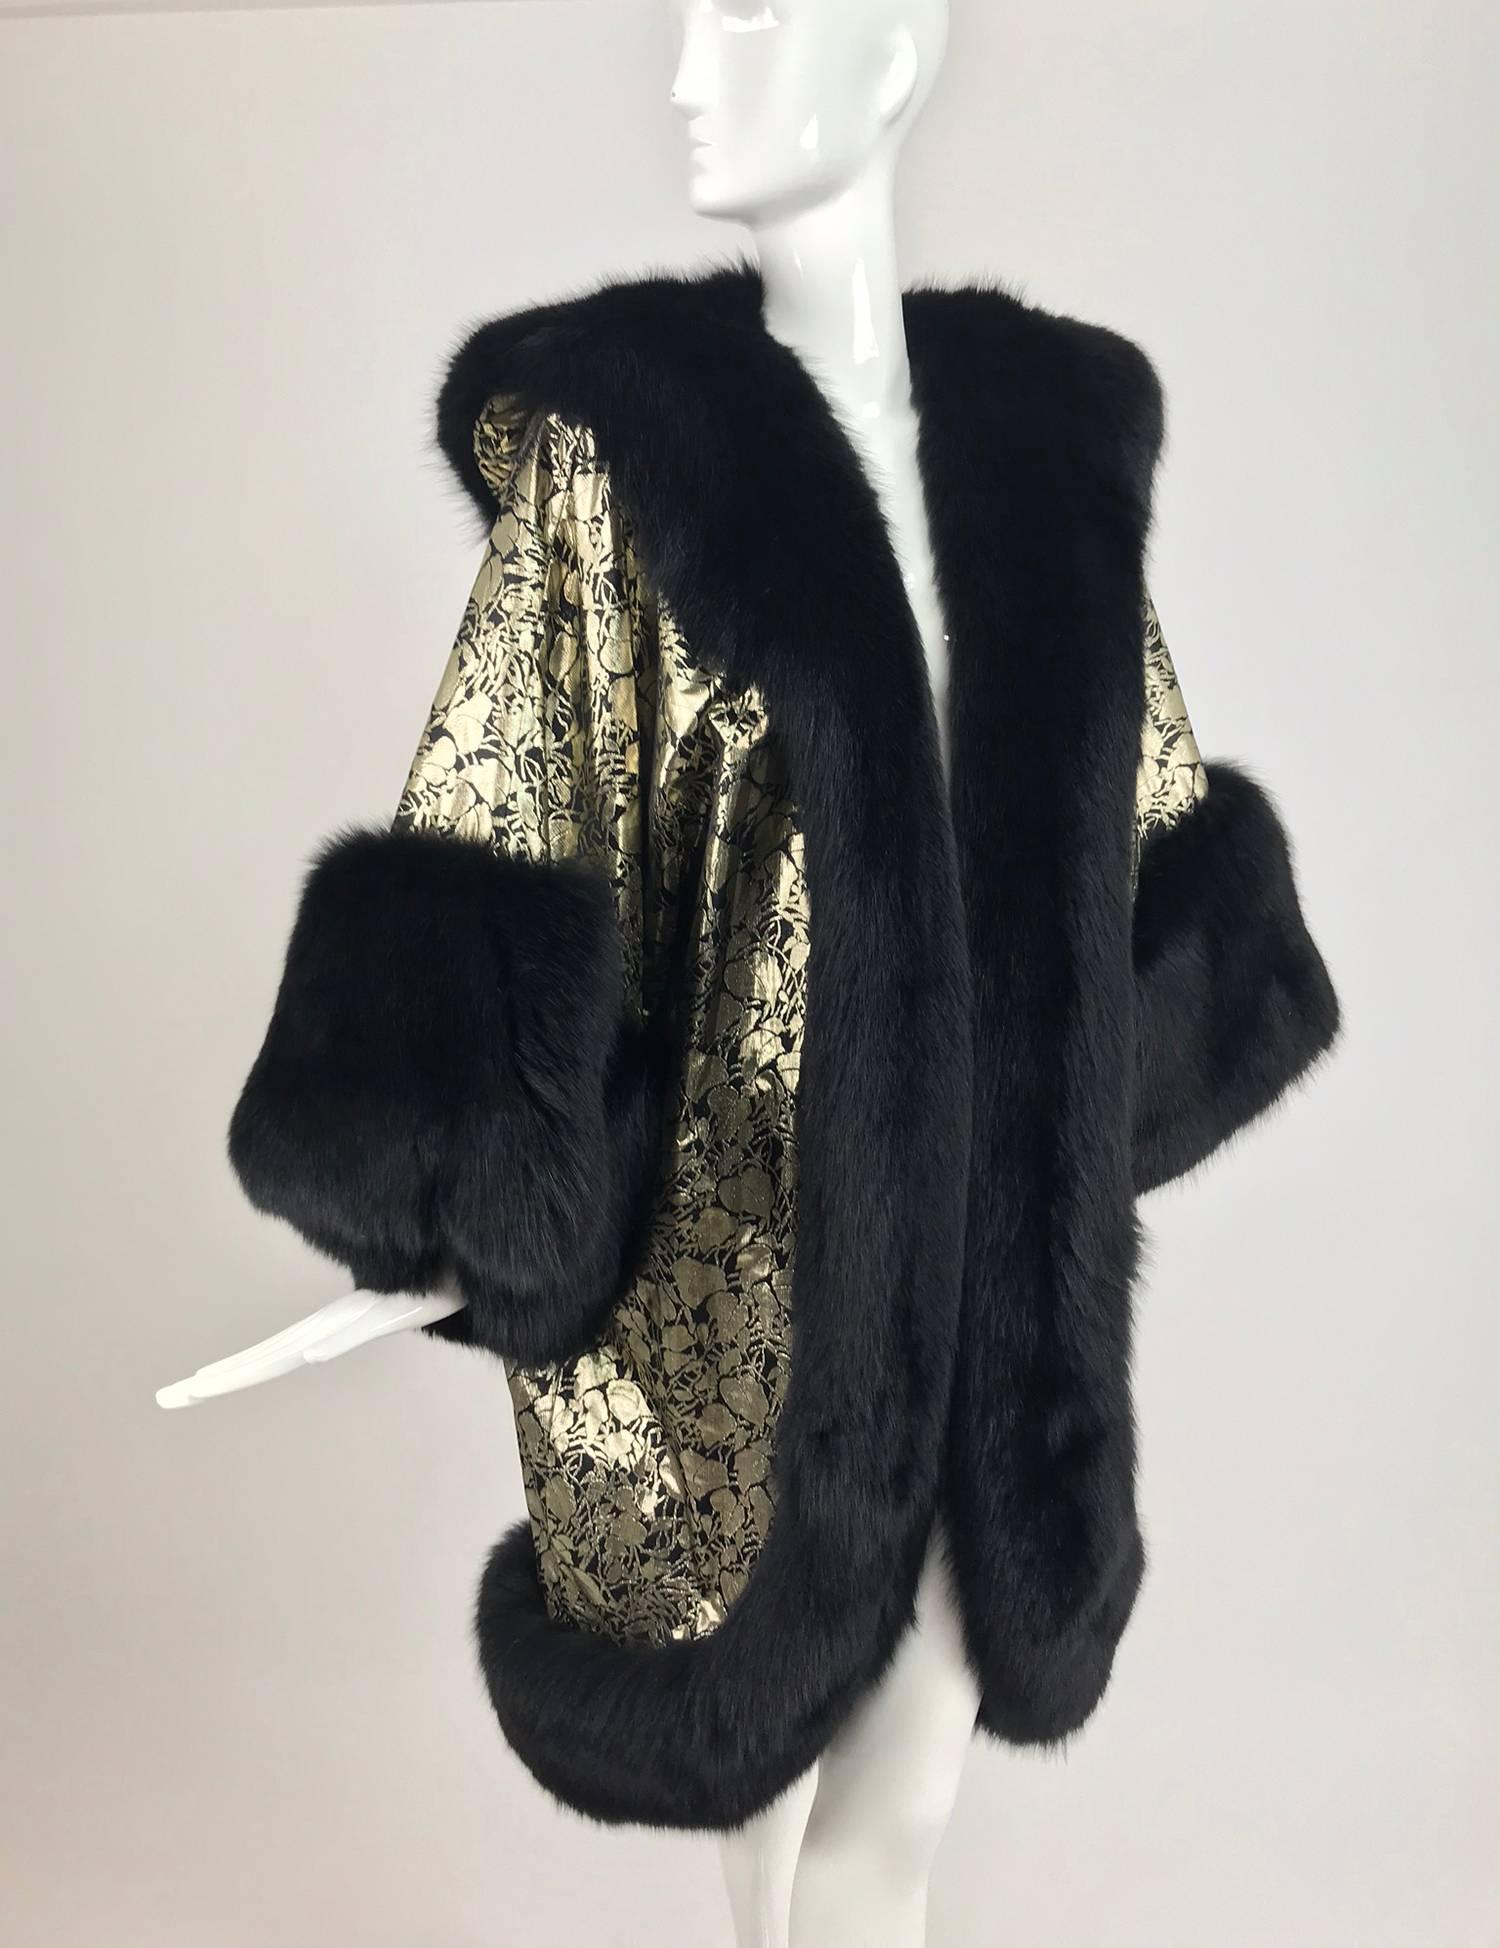 Amen Wardy Gold Metallic brocade and black fox fur trim 20s style coat 1980s...In the 1980s Amen Wardy's  Newport Center Fashion Island was a legendary designer shopping mecca located in Newport Beach California. 30,000 square feet of couture and